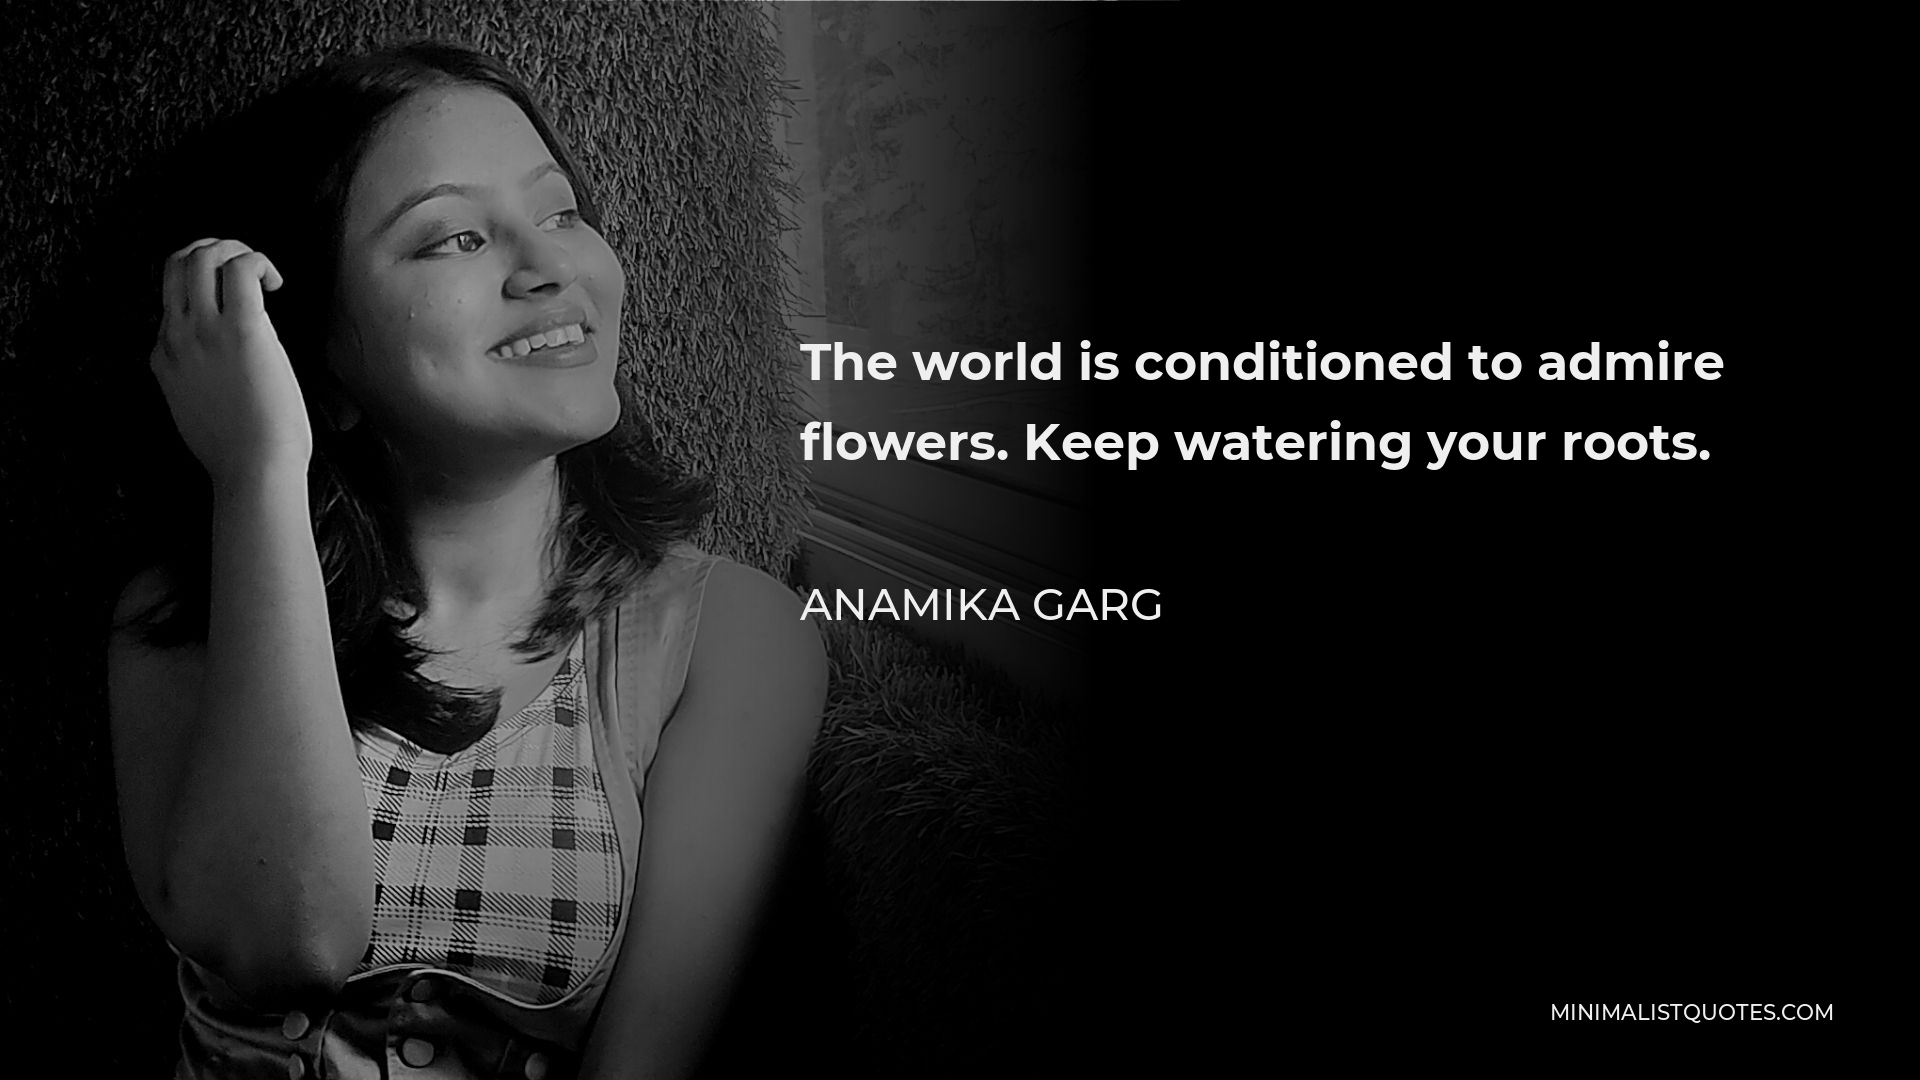 Anamika Garg Quote - The world is conditioned to admire flowers. Keep watering your roots.